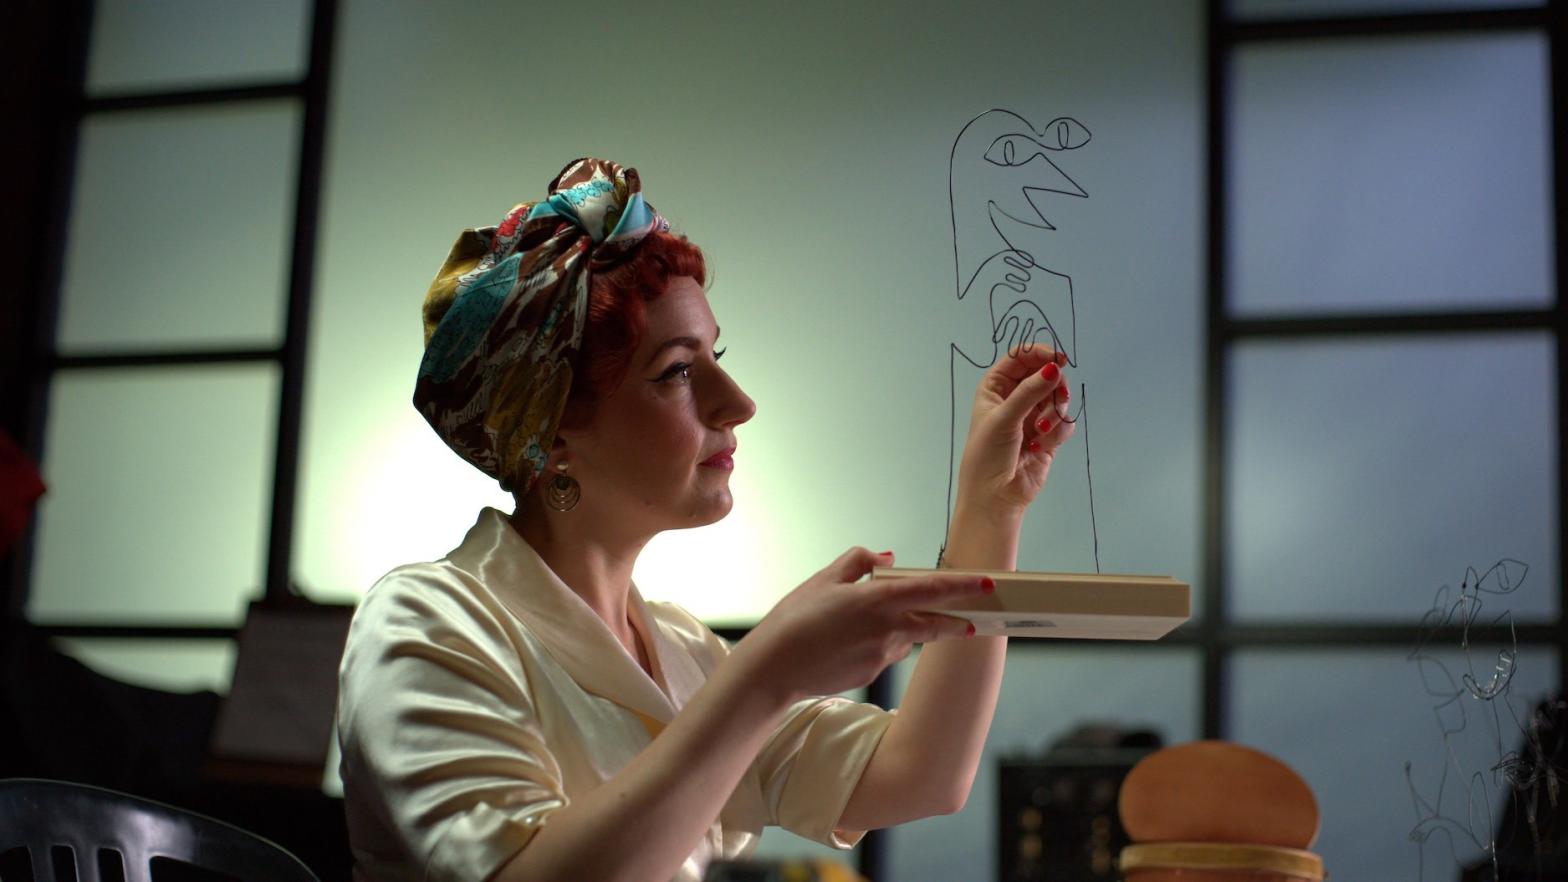 Pixar animator Deanna Marsigliese works with a character from Soul in Inside Pixar. (Photo: Disney Plus)